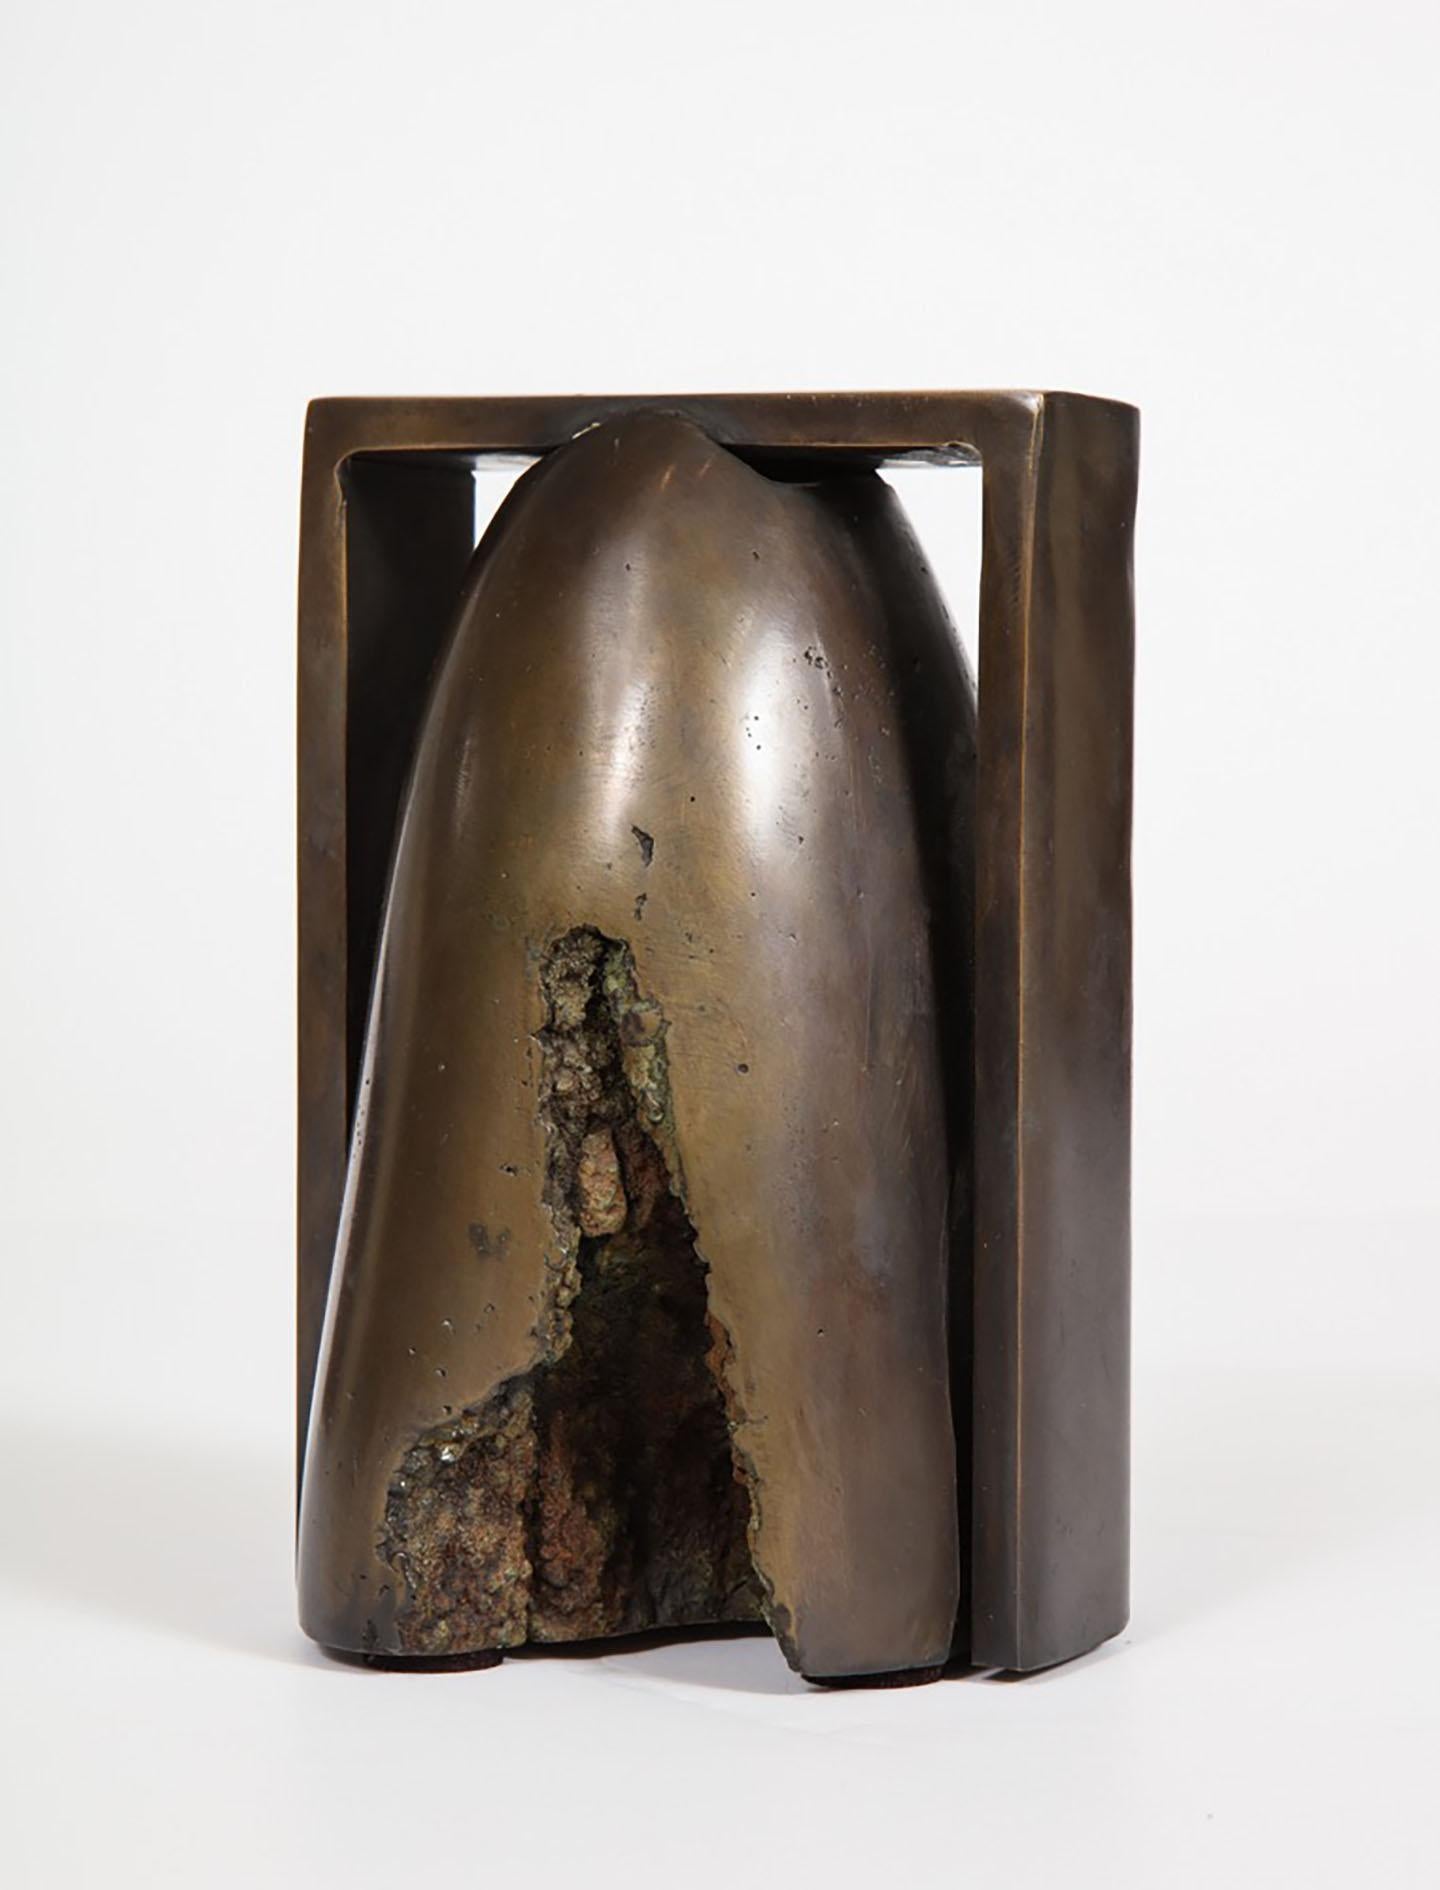 Bronze, “Massah” (Small Dome), 1999

“Massah” (Small Dome), 1999

By, Jay Wholley.